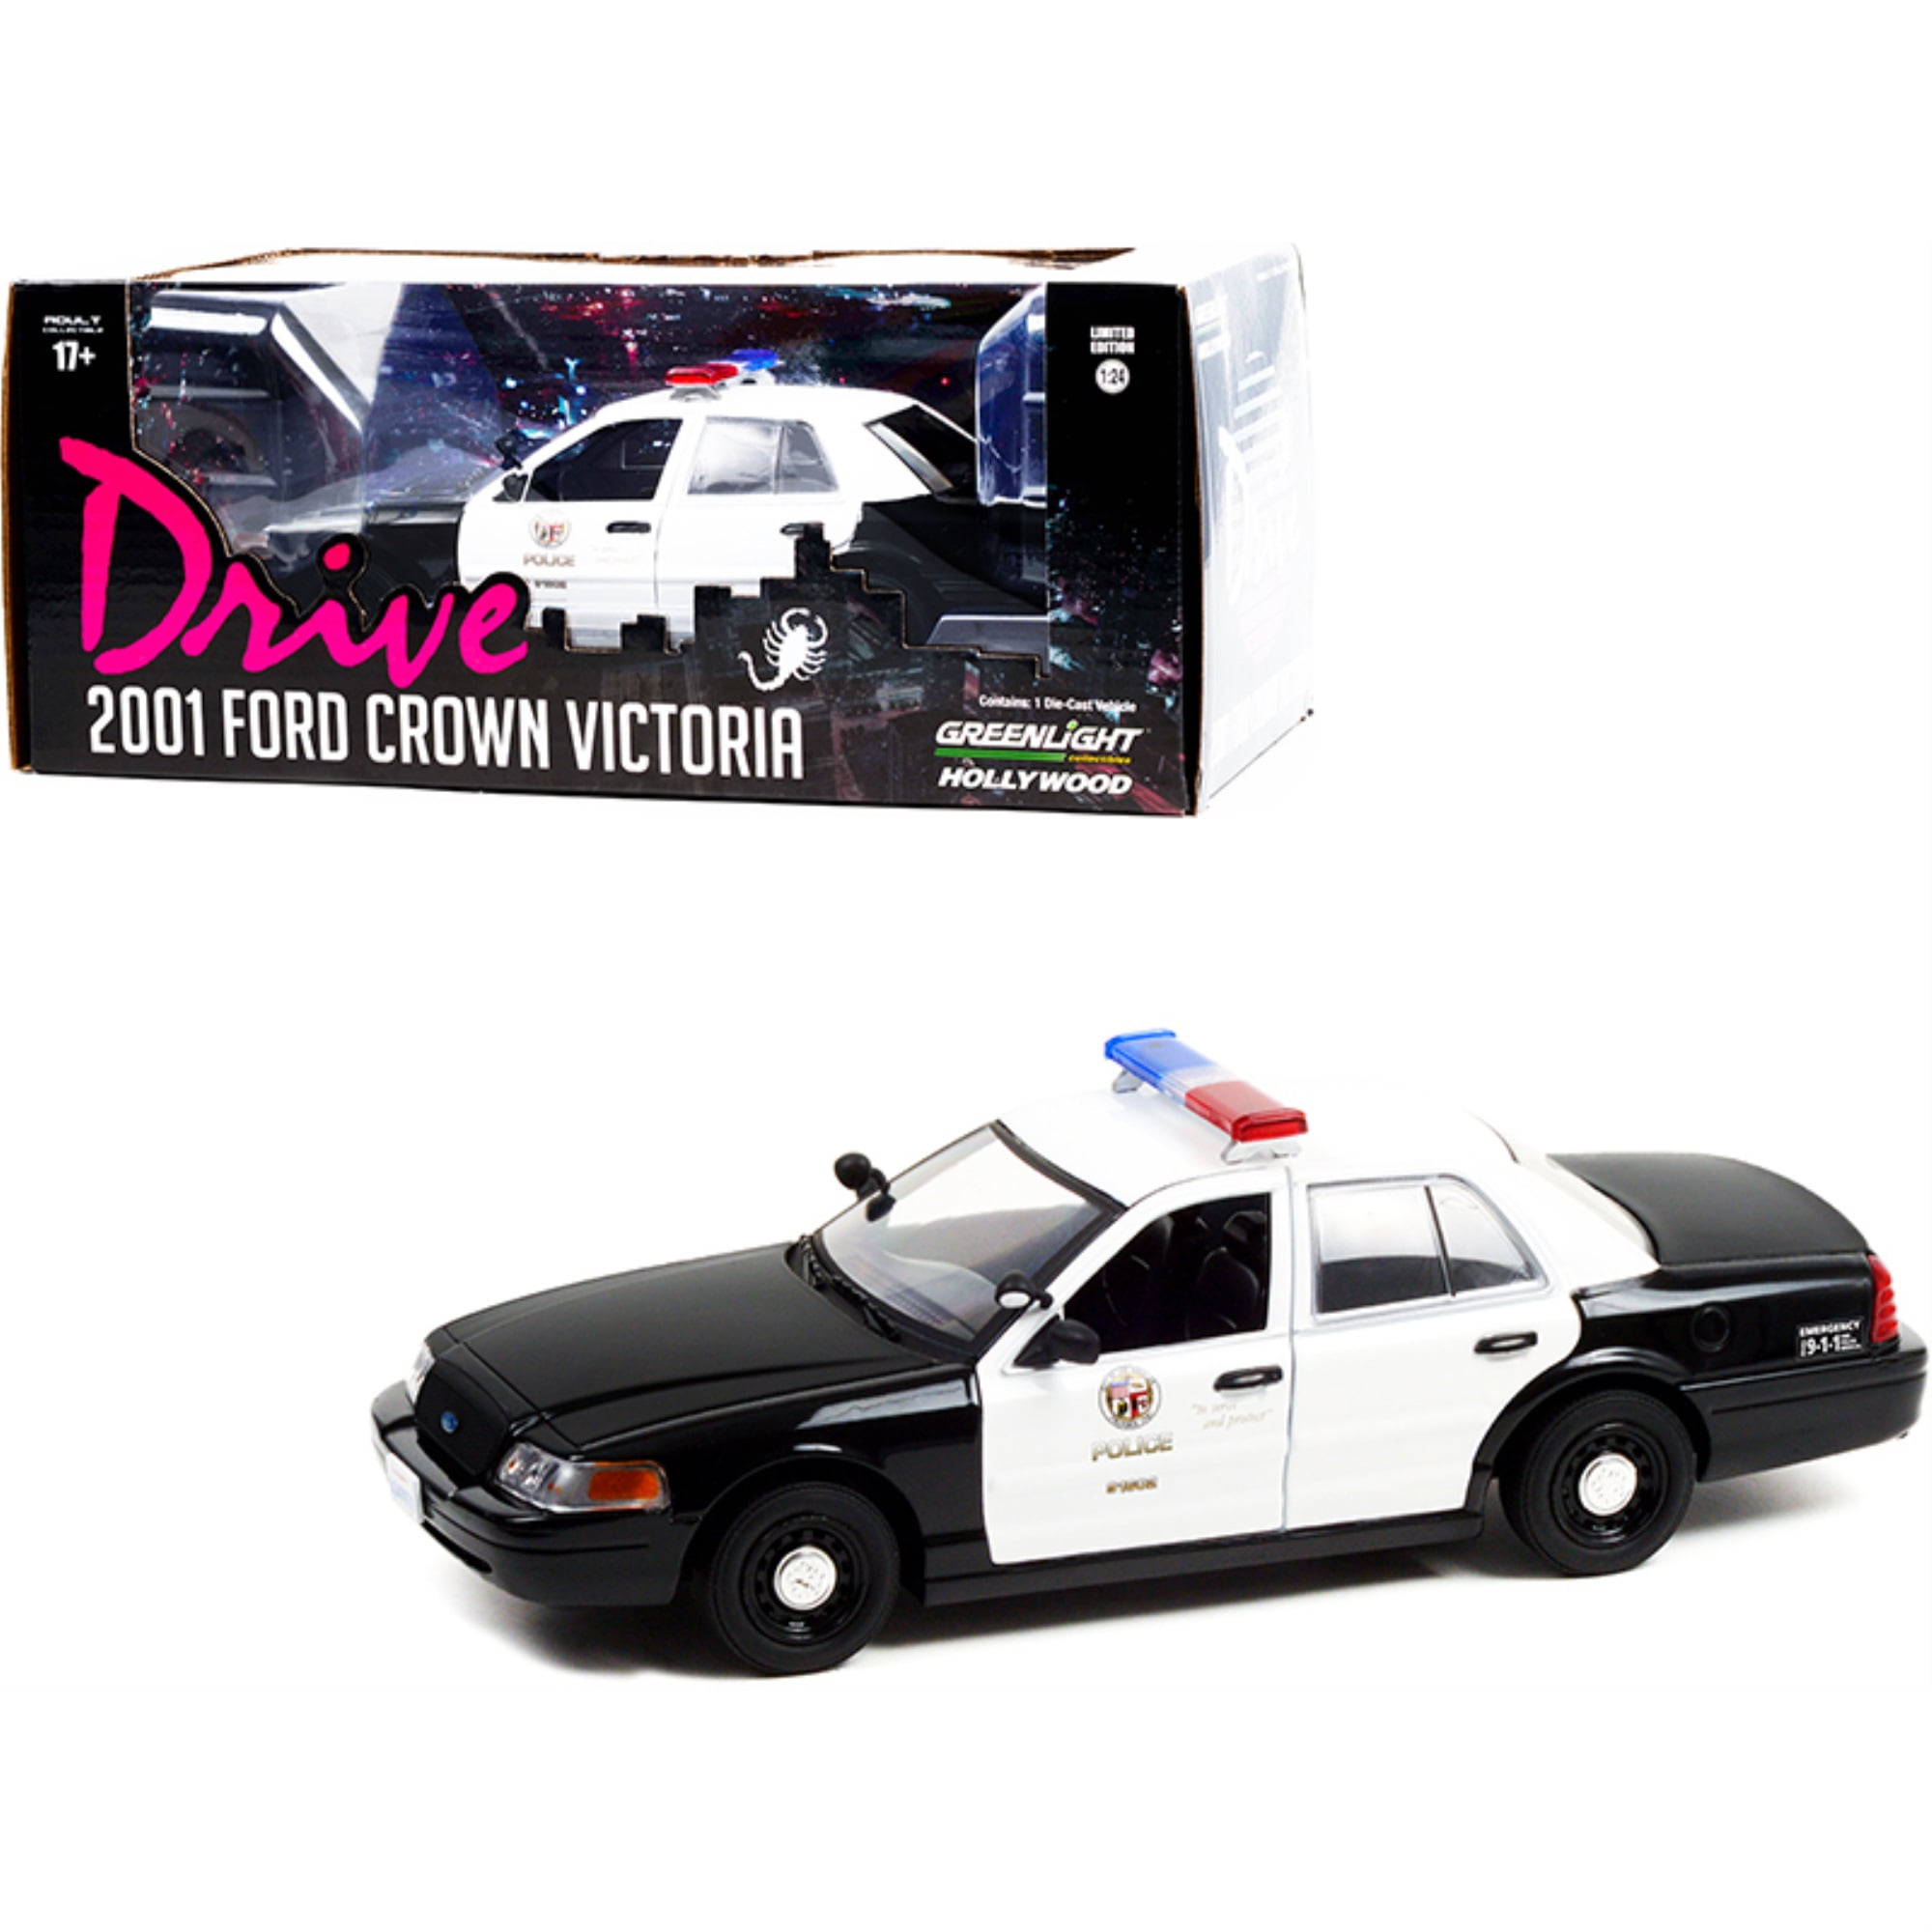 Police Car with Light 1:24 Die Cast 2001 Ford Crown Victoria Black and White 